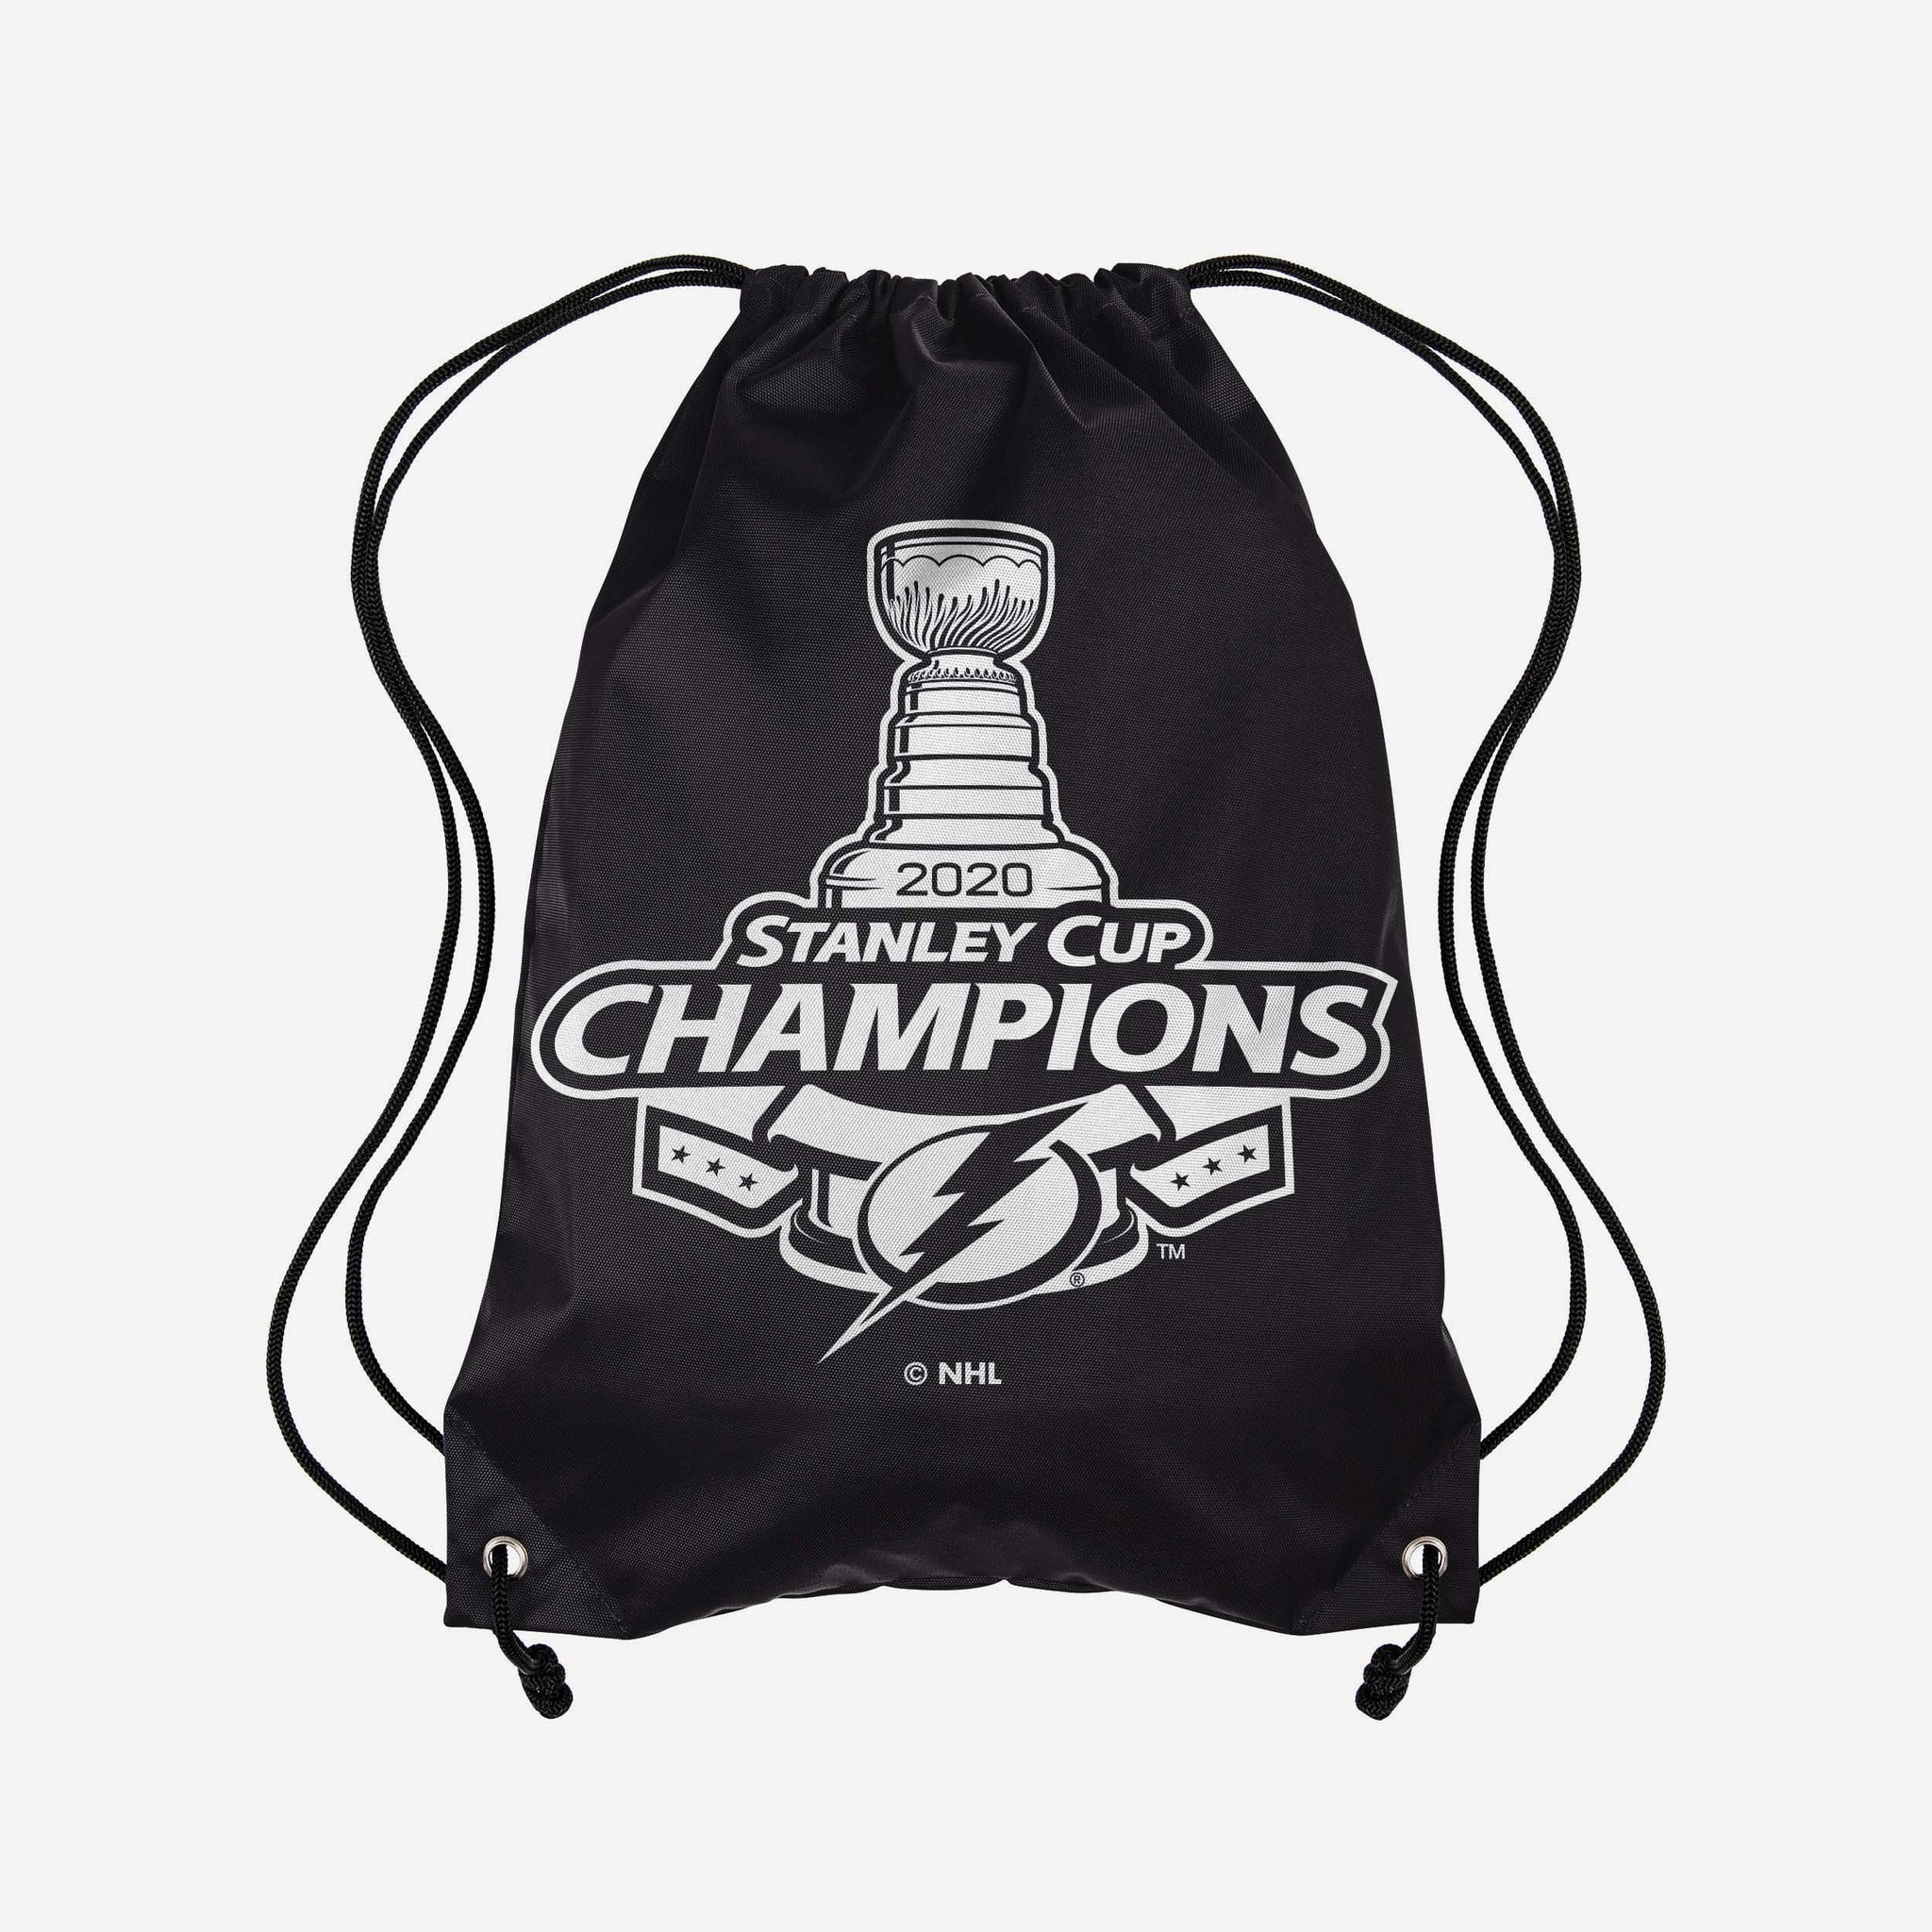 Tampa Bay Lightning Apparel, Collectibles, and Fan Gear. FOCO